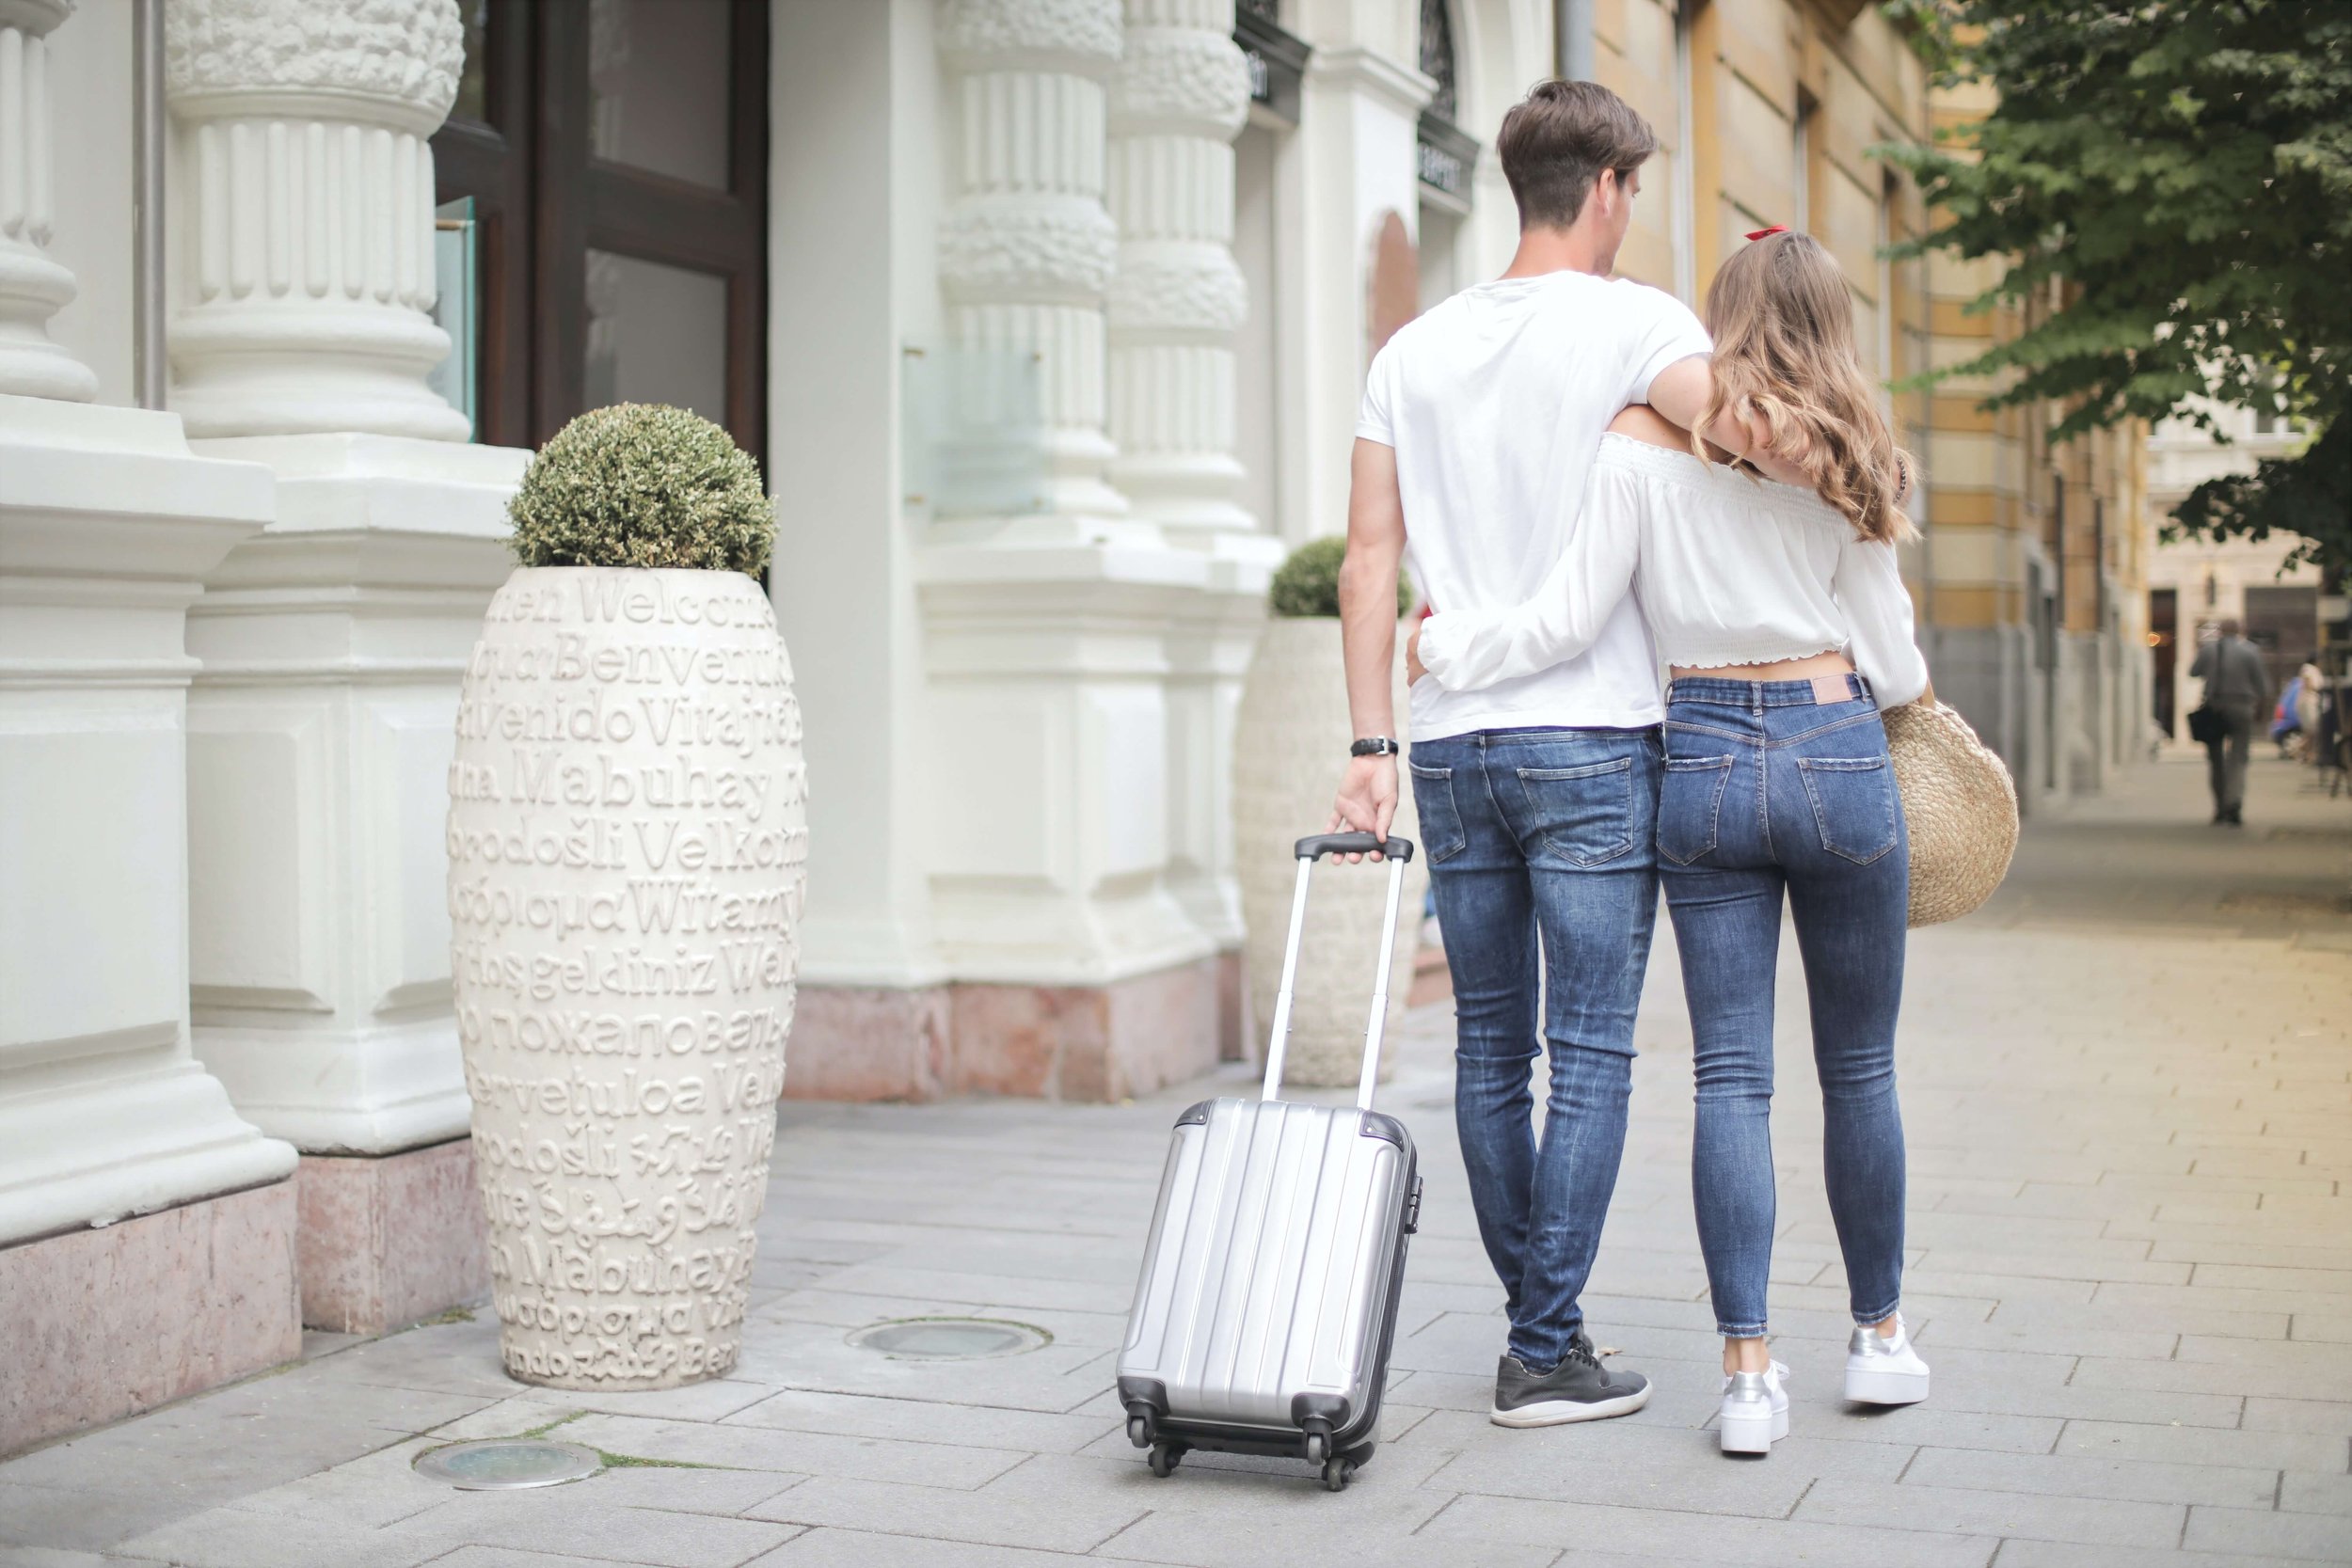 A couple walks together with their luggage on a city street during vacation. Comparing your experiences to Instagram Reality can be detrimental to your mental health. Therapy for Young Adults in NYC can offer support and guidance.